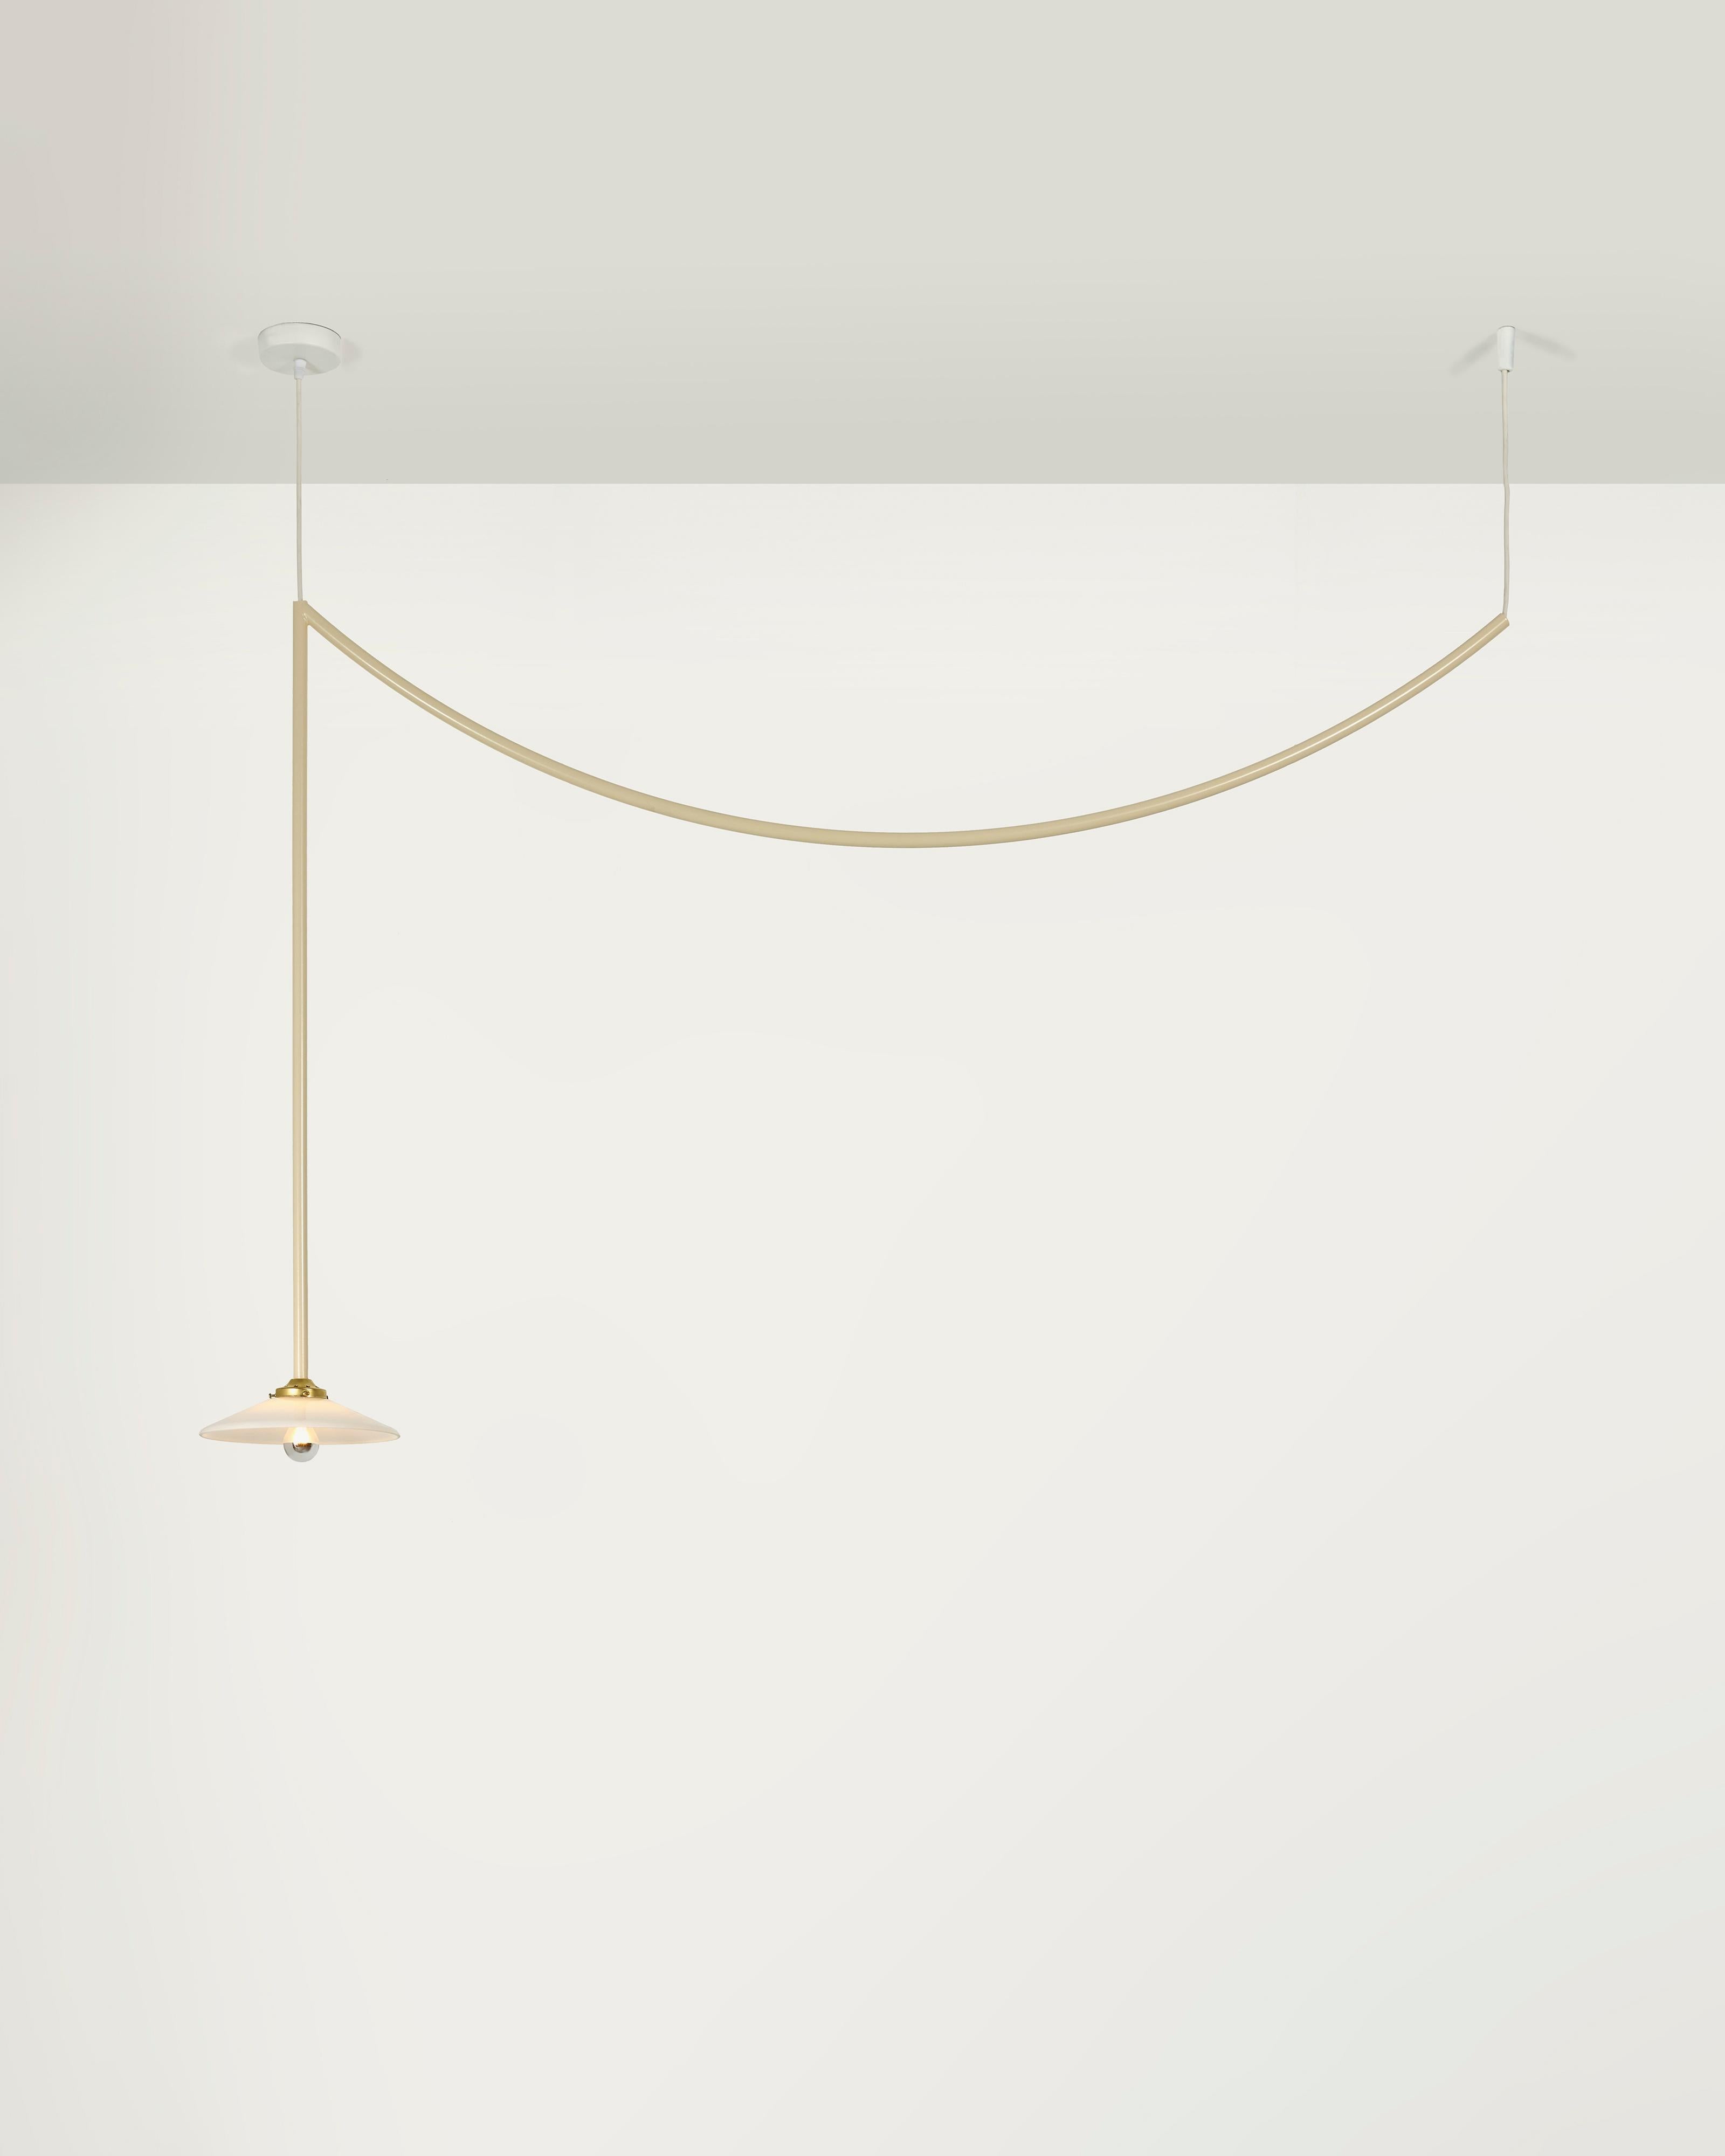 Steel Contemporary Ceiling Lamp N°4 by Muller Van Severen x Valerie Objects, Green For Sale